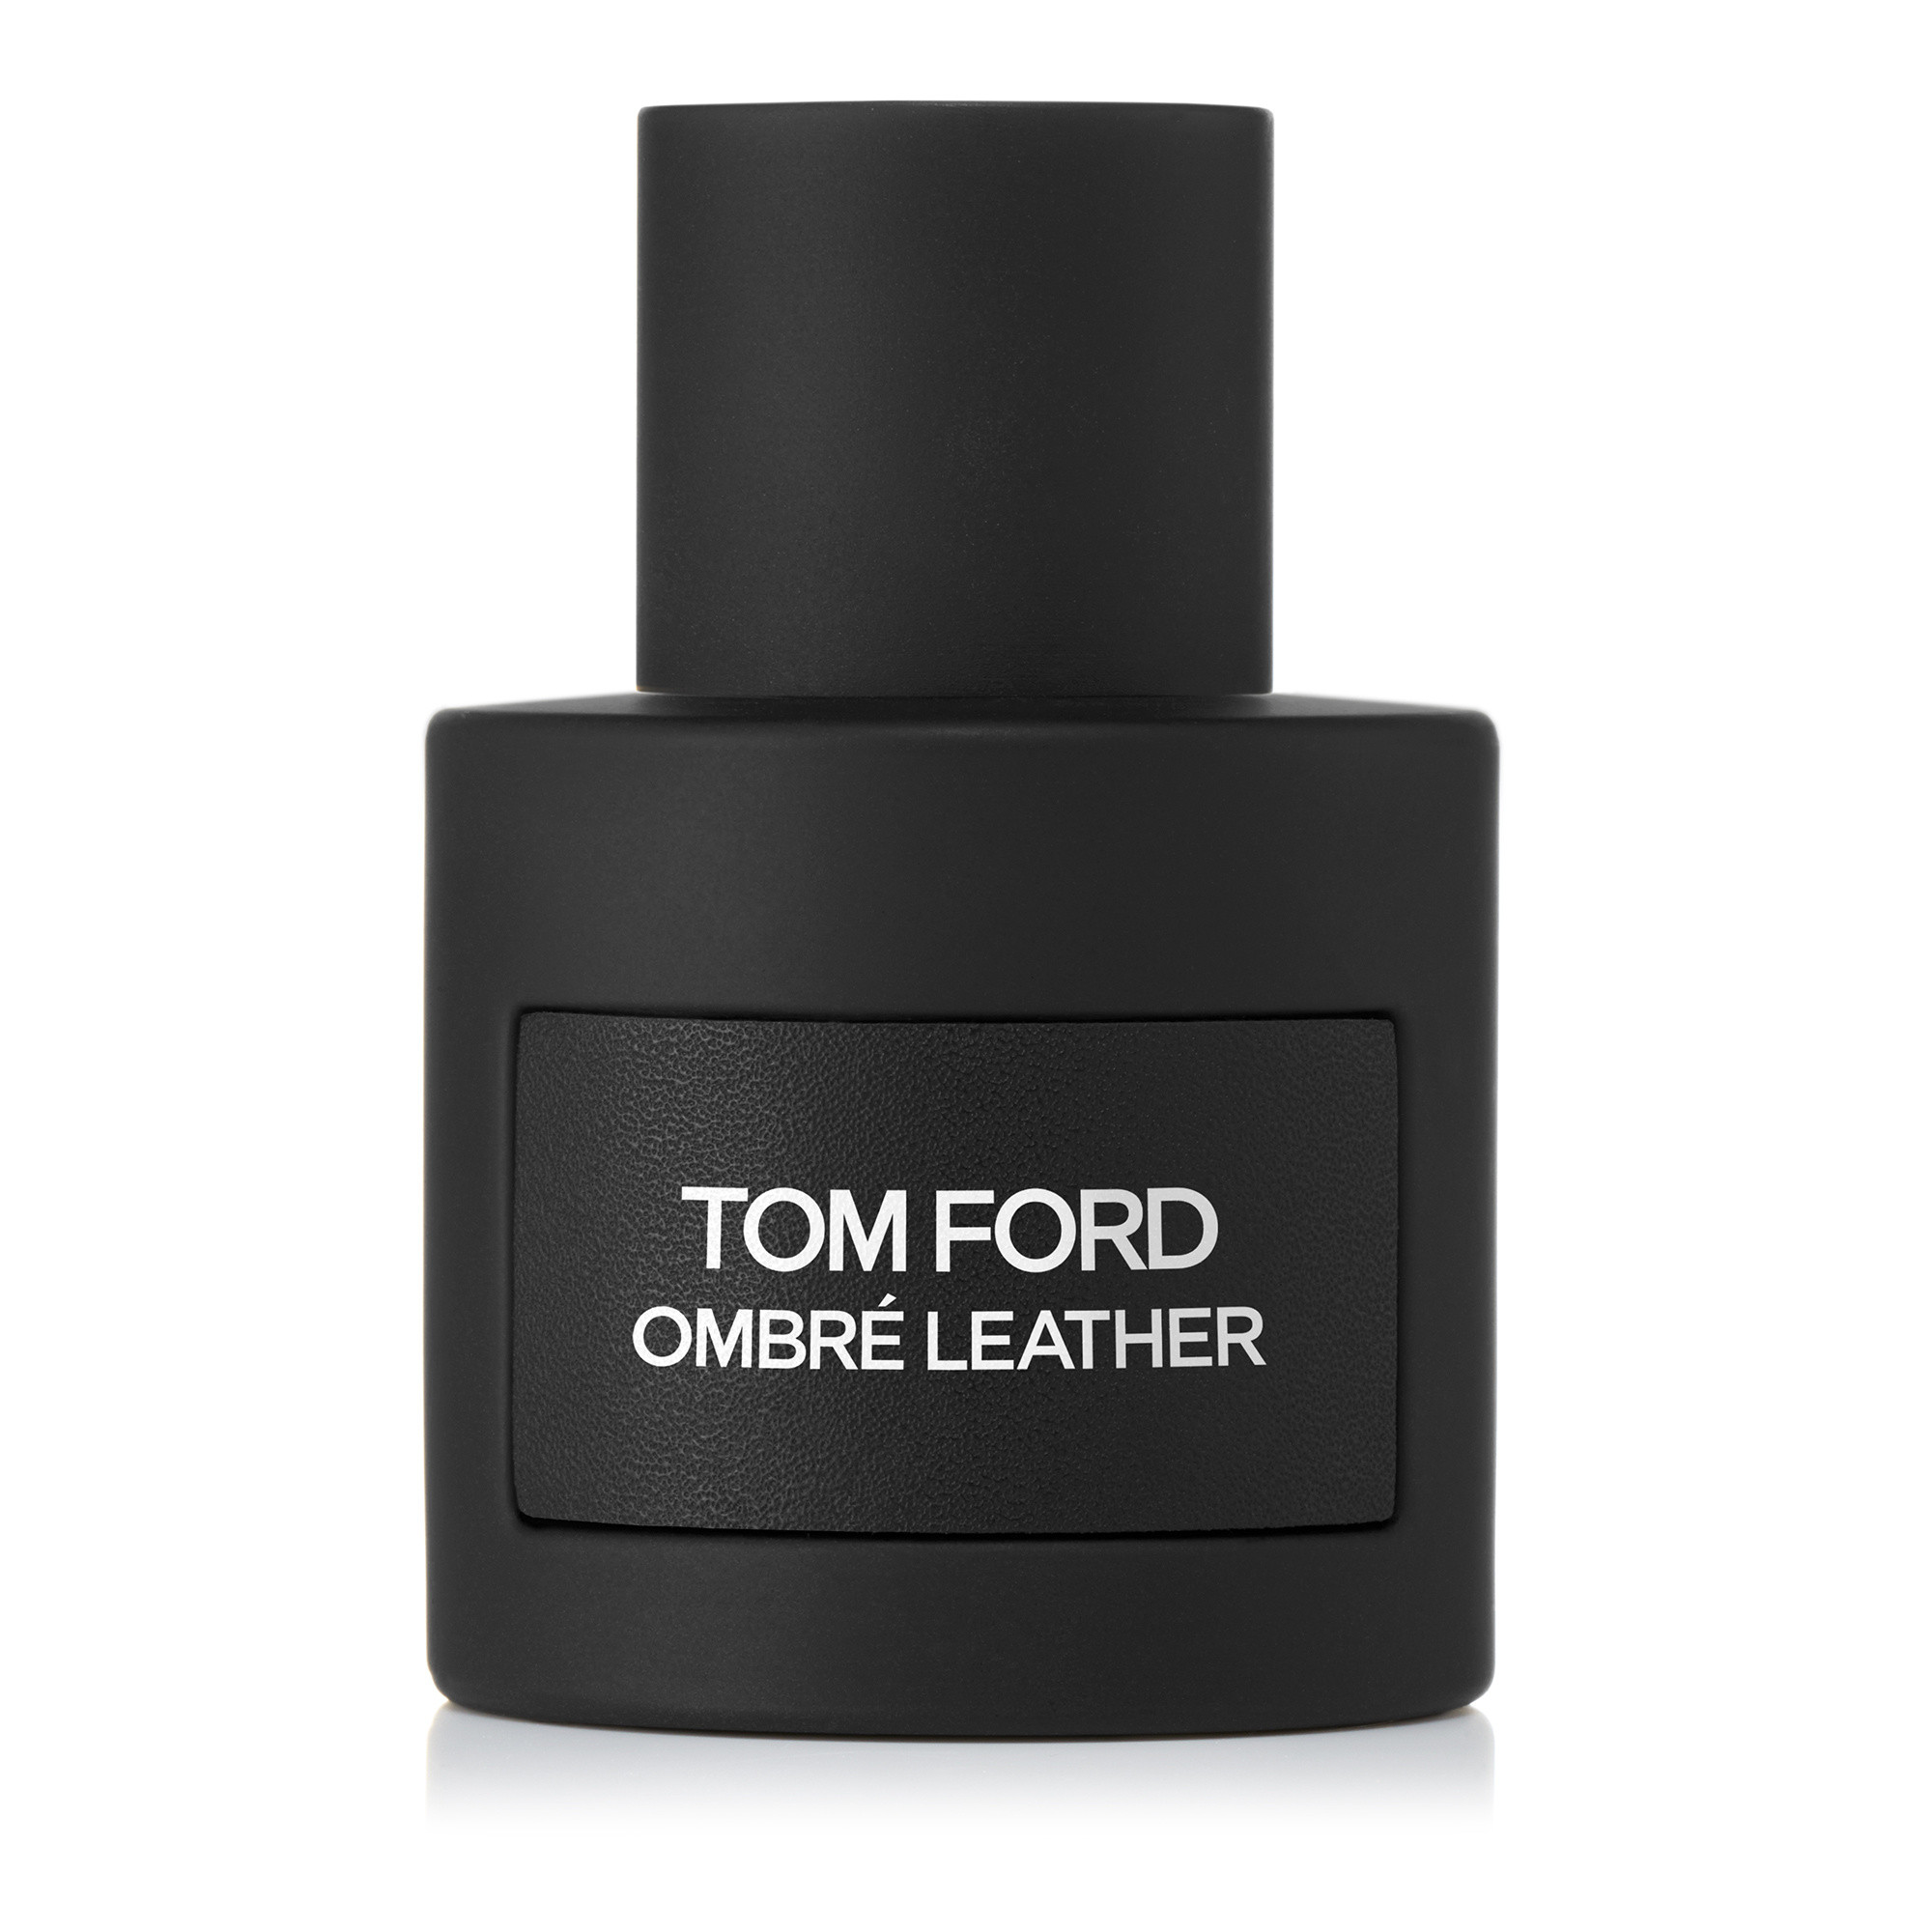 Tom Ford Ombré Leather, Nero, large